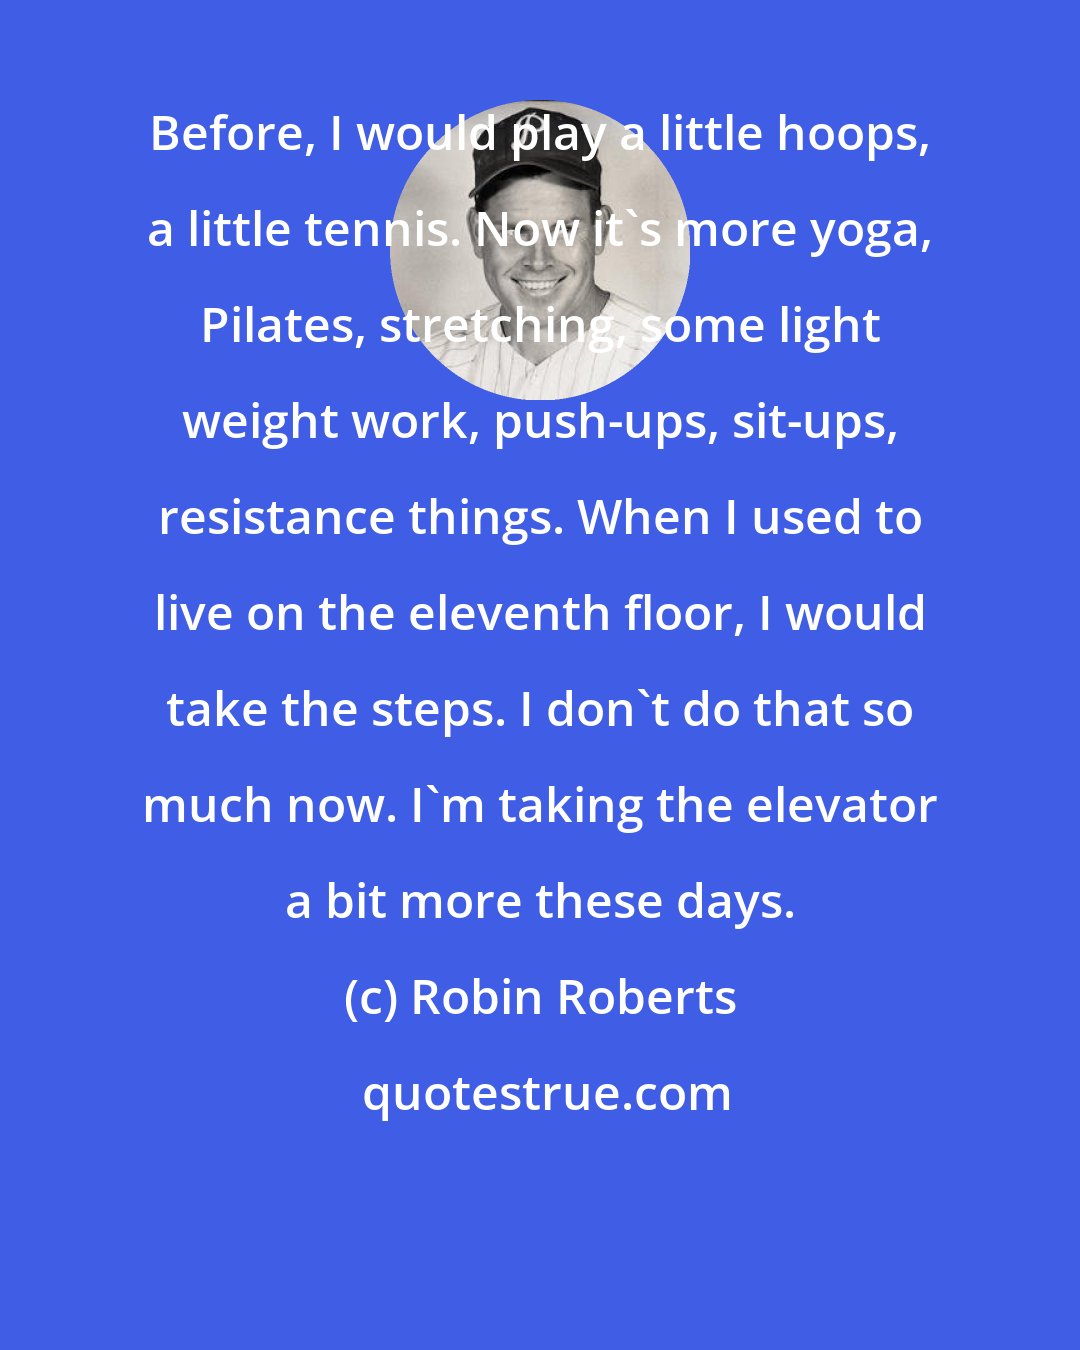 Robin Roberts: Before, I would play a little hoops, a little tennis. Now it's more yoga, Pilates, stretching, some light weight work, push-ups, sit-ups, resistance things. When I used to live on the eleventh floor, I would take the steps. I don't do that so much now. I'm taking the elevator a bit more these days.